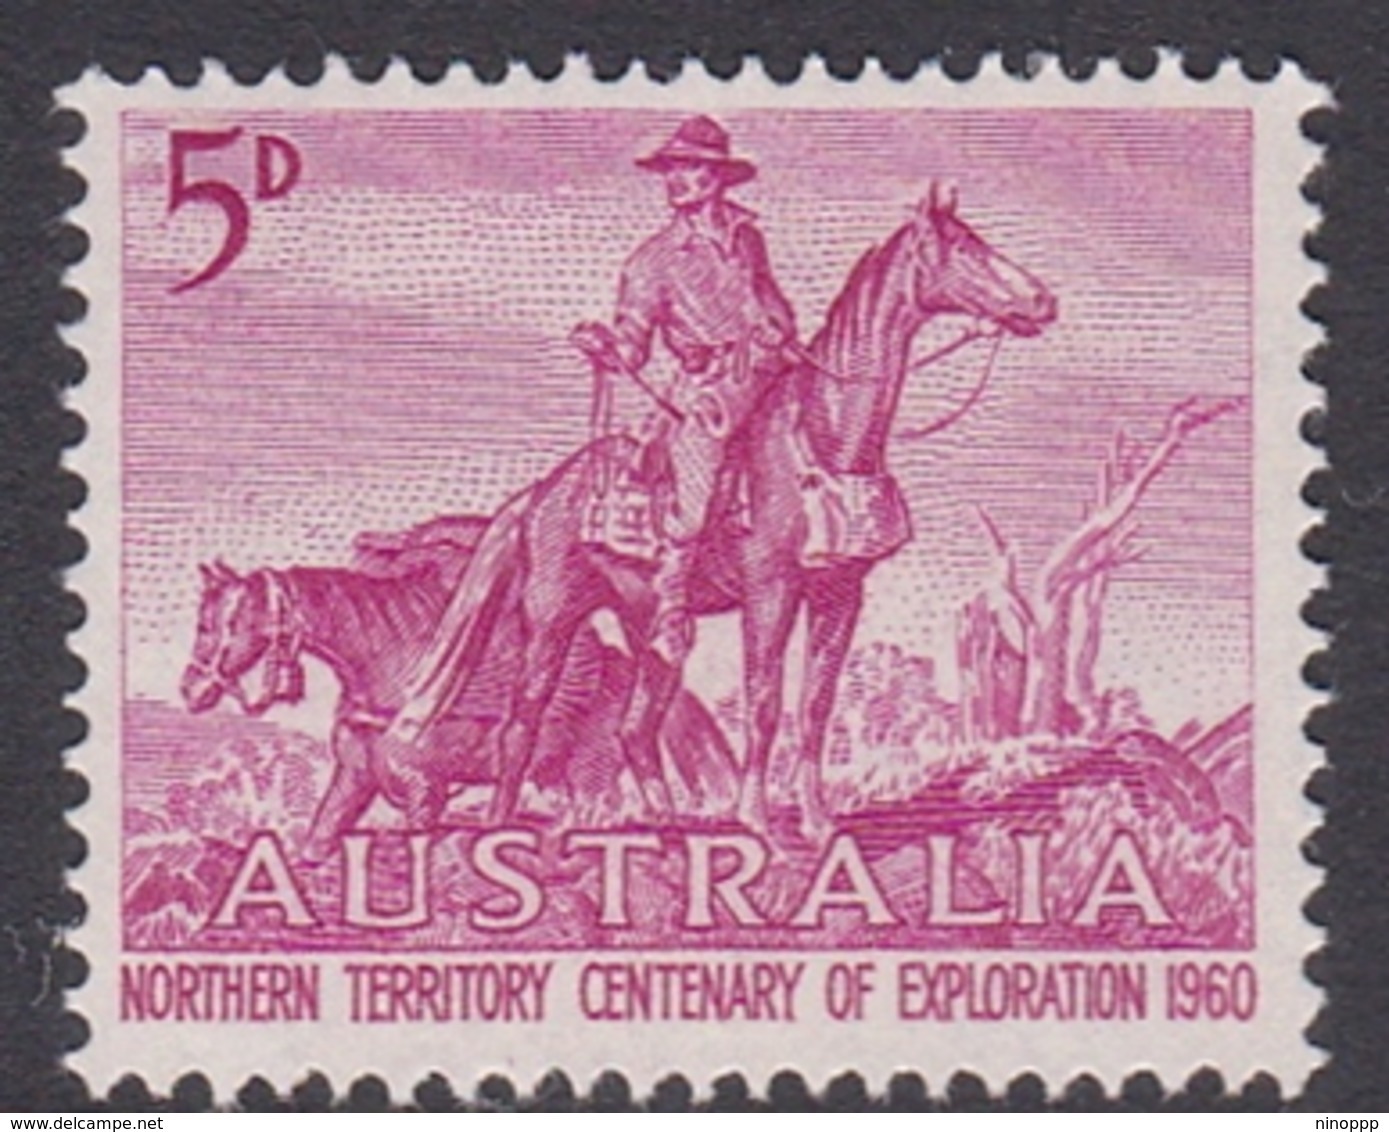 Australia ASC 363  1960 Centenary Exploration Northern Territory, Mint Never Hinged - Mint Stamps